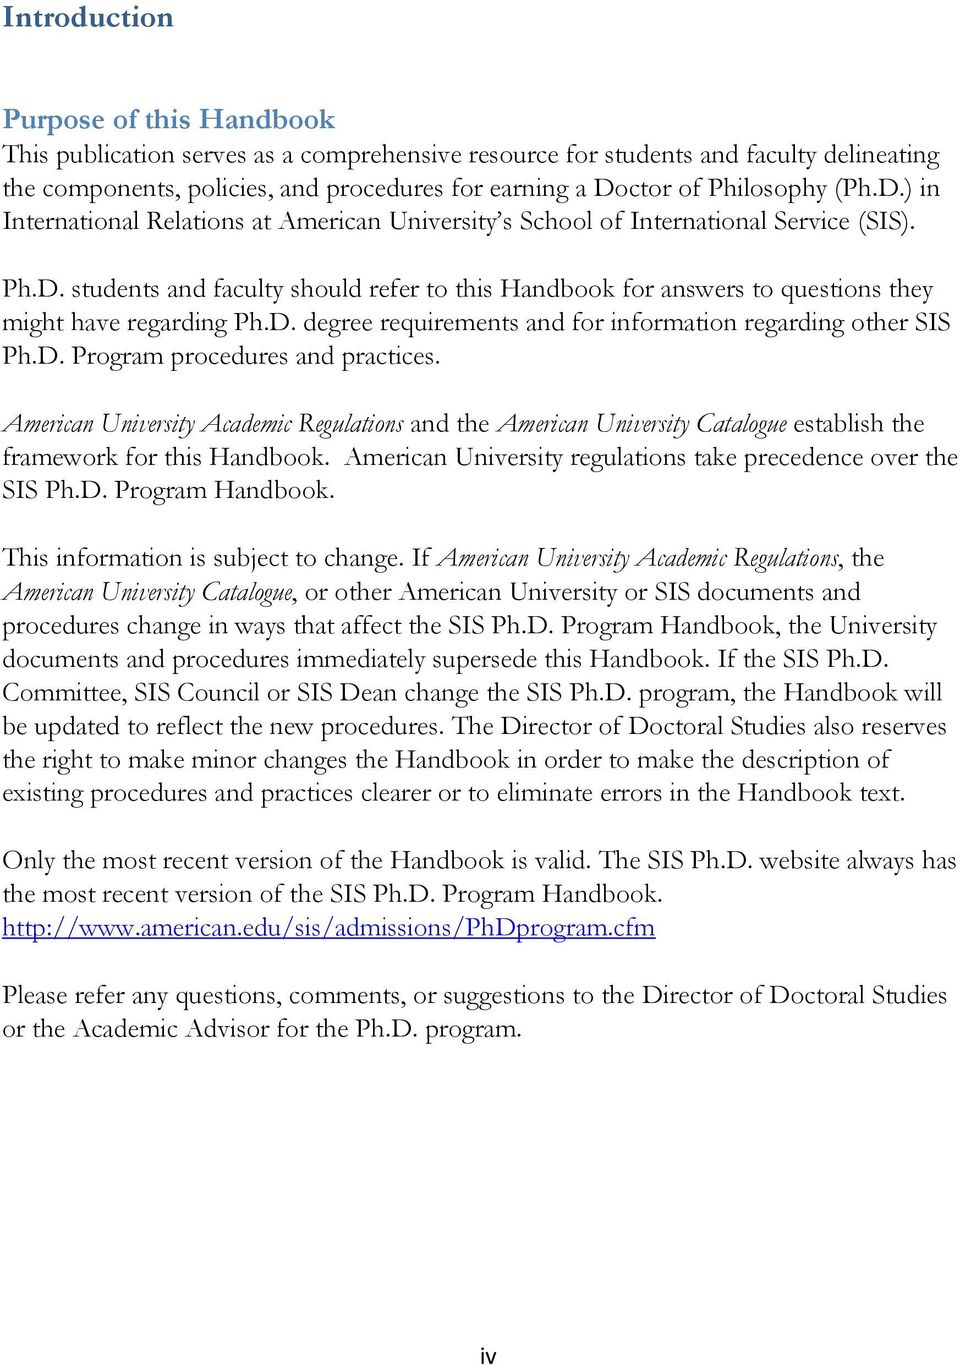 D. degree requirements and for information regarding other SIS Ph.D. Program procedures and practices.